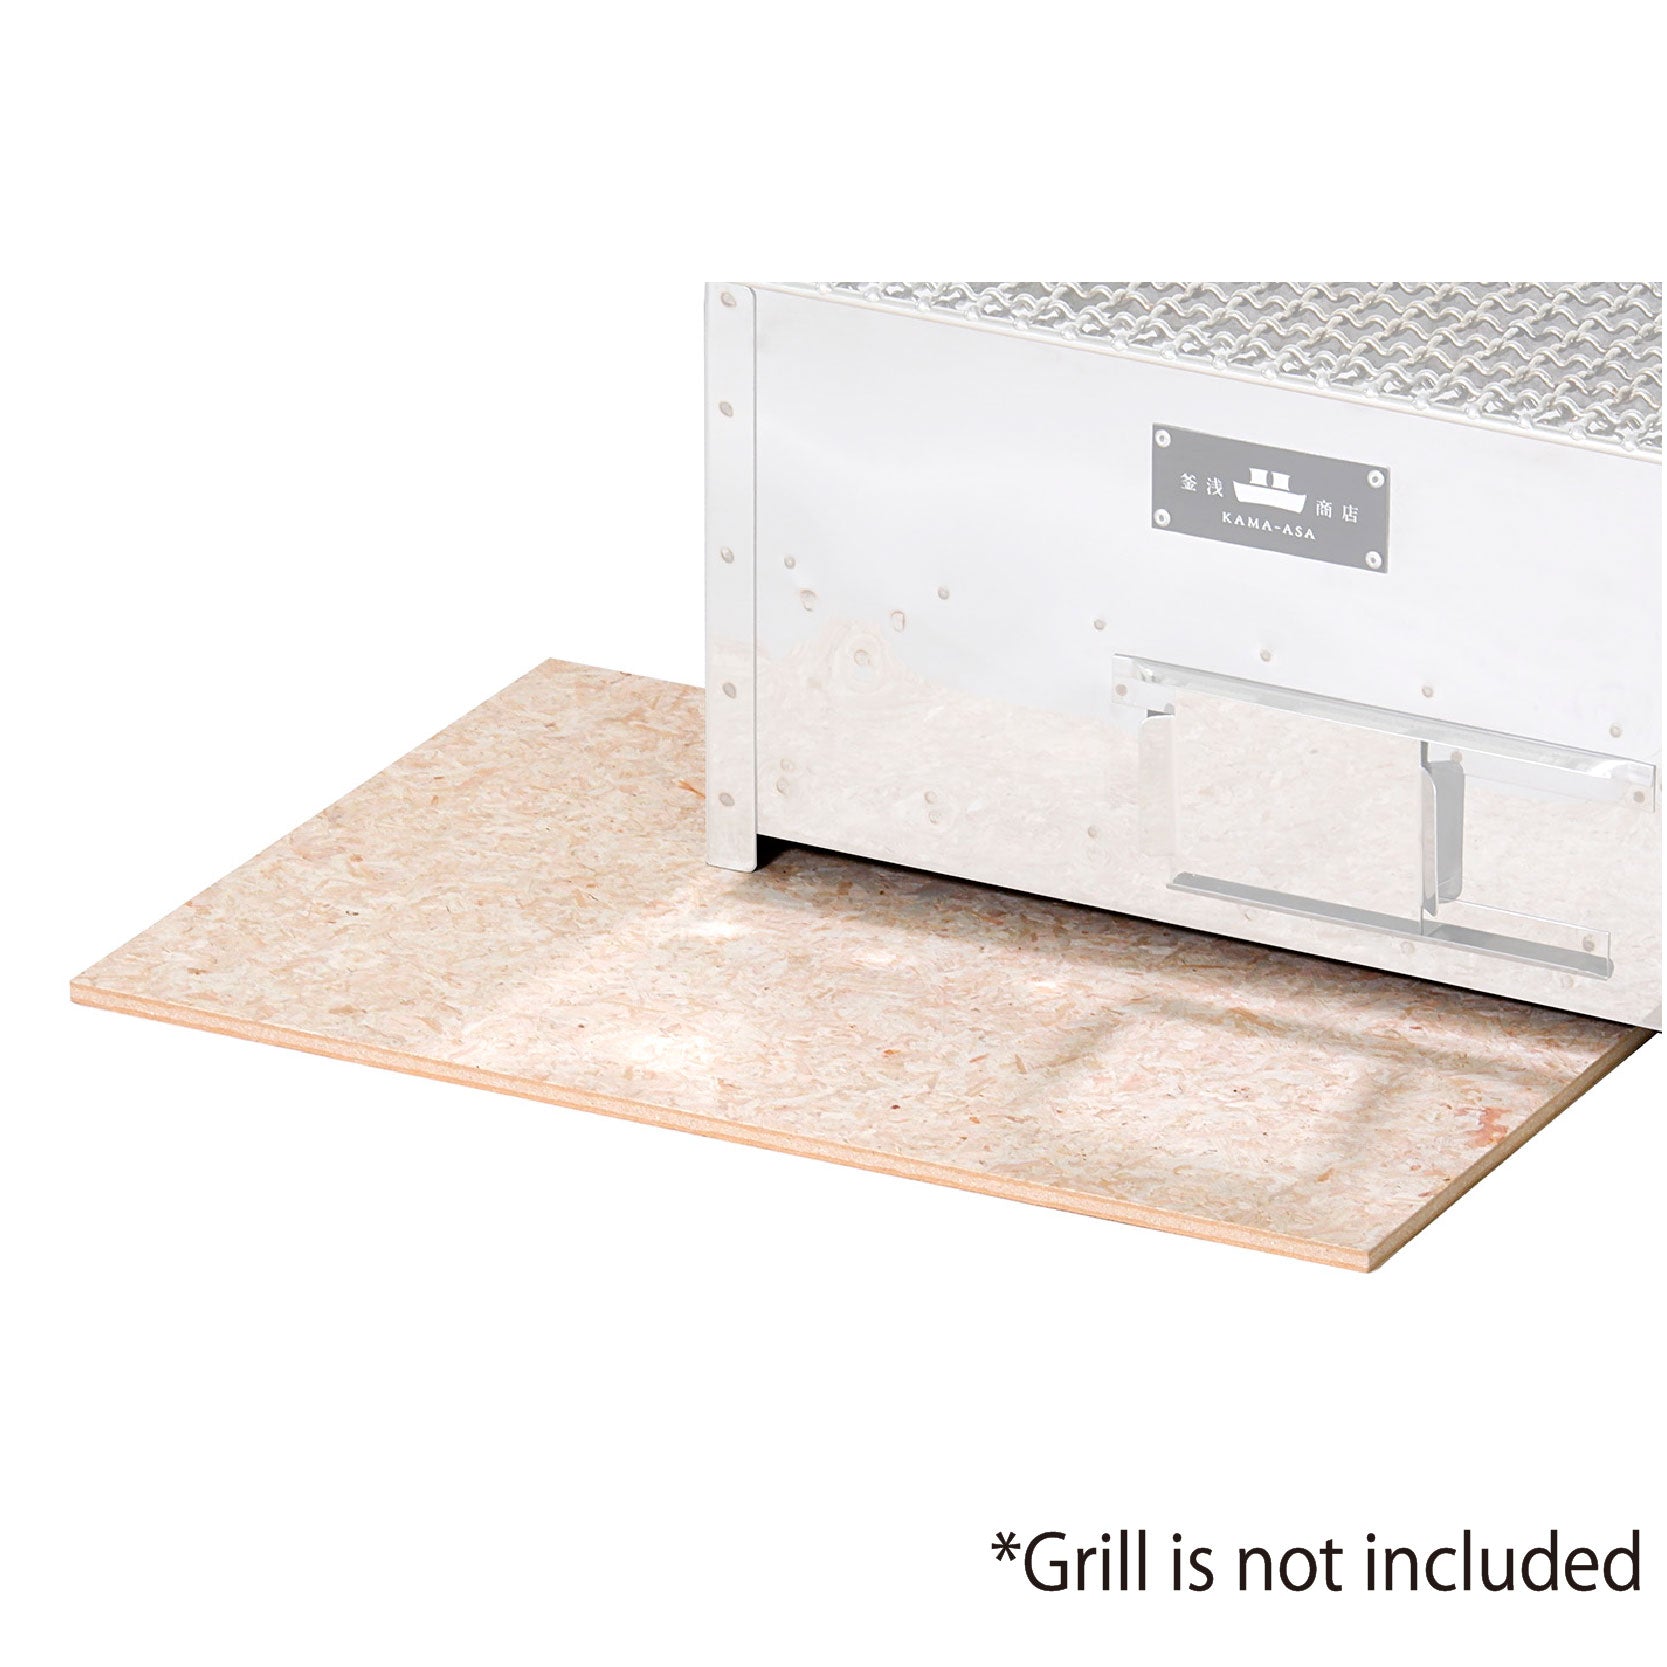 Heat resistant board for KAMA-ASA's stone charcoal grill